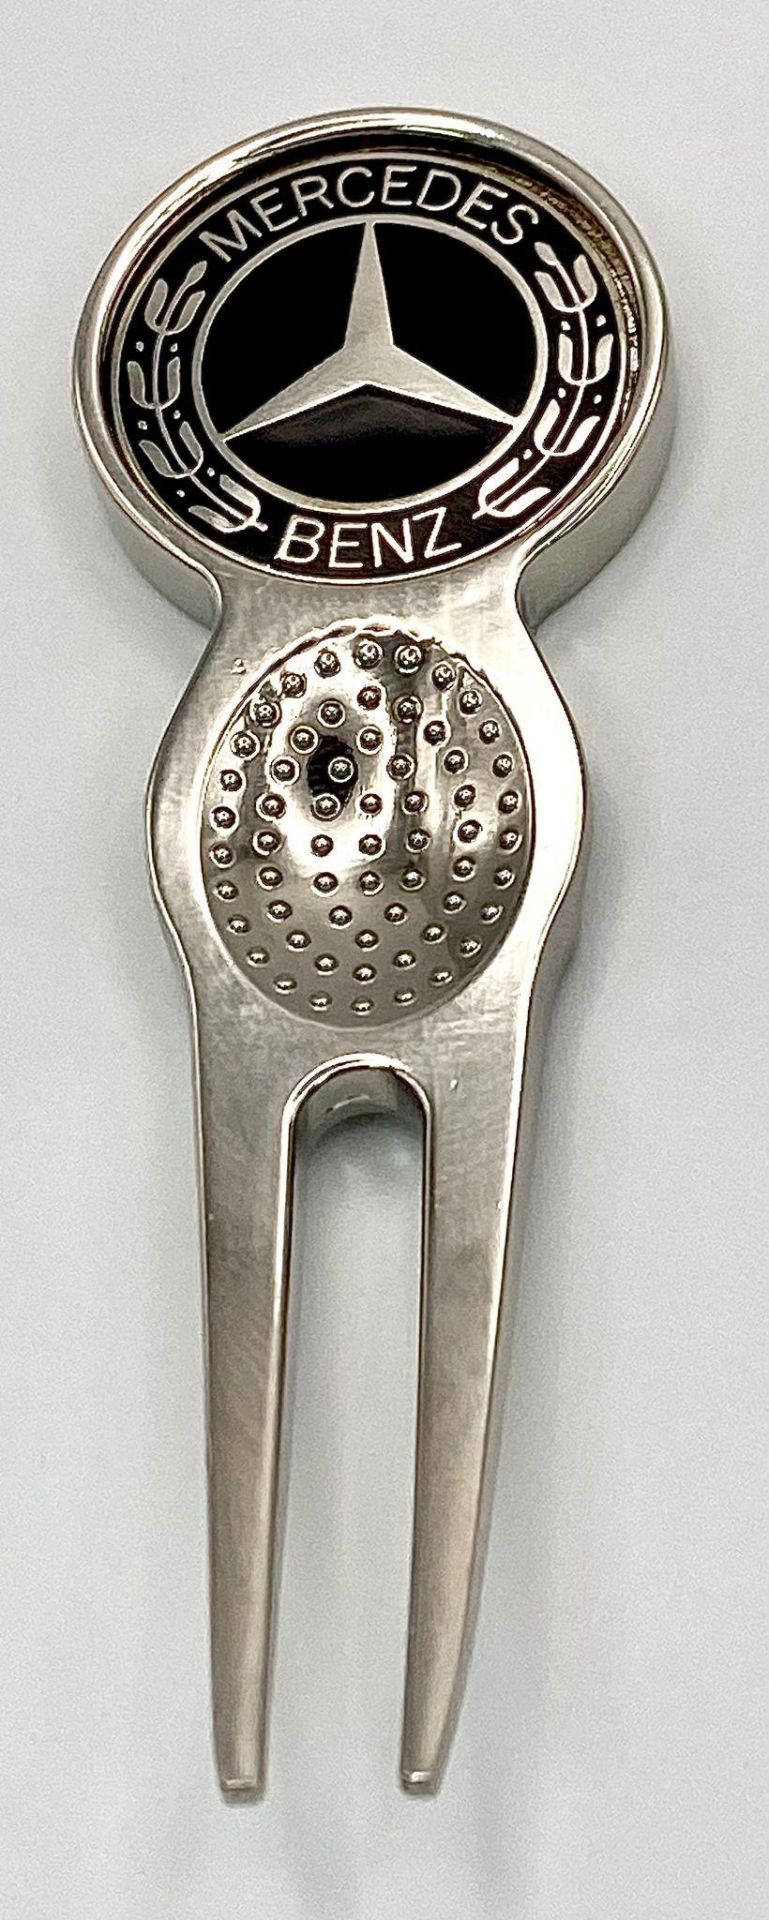 A Mercedes Benz Branded Putting Divot Tool. Detachable ball marker. 8cm. As new. - Image 2 of 3